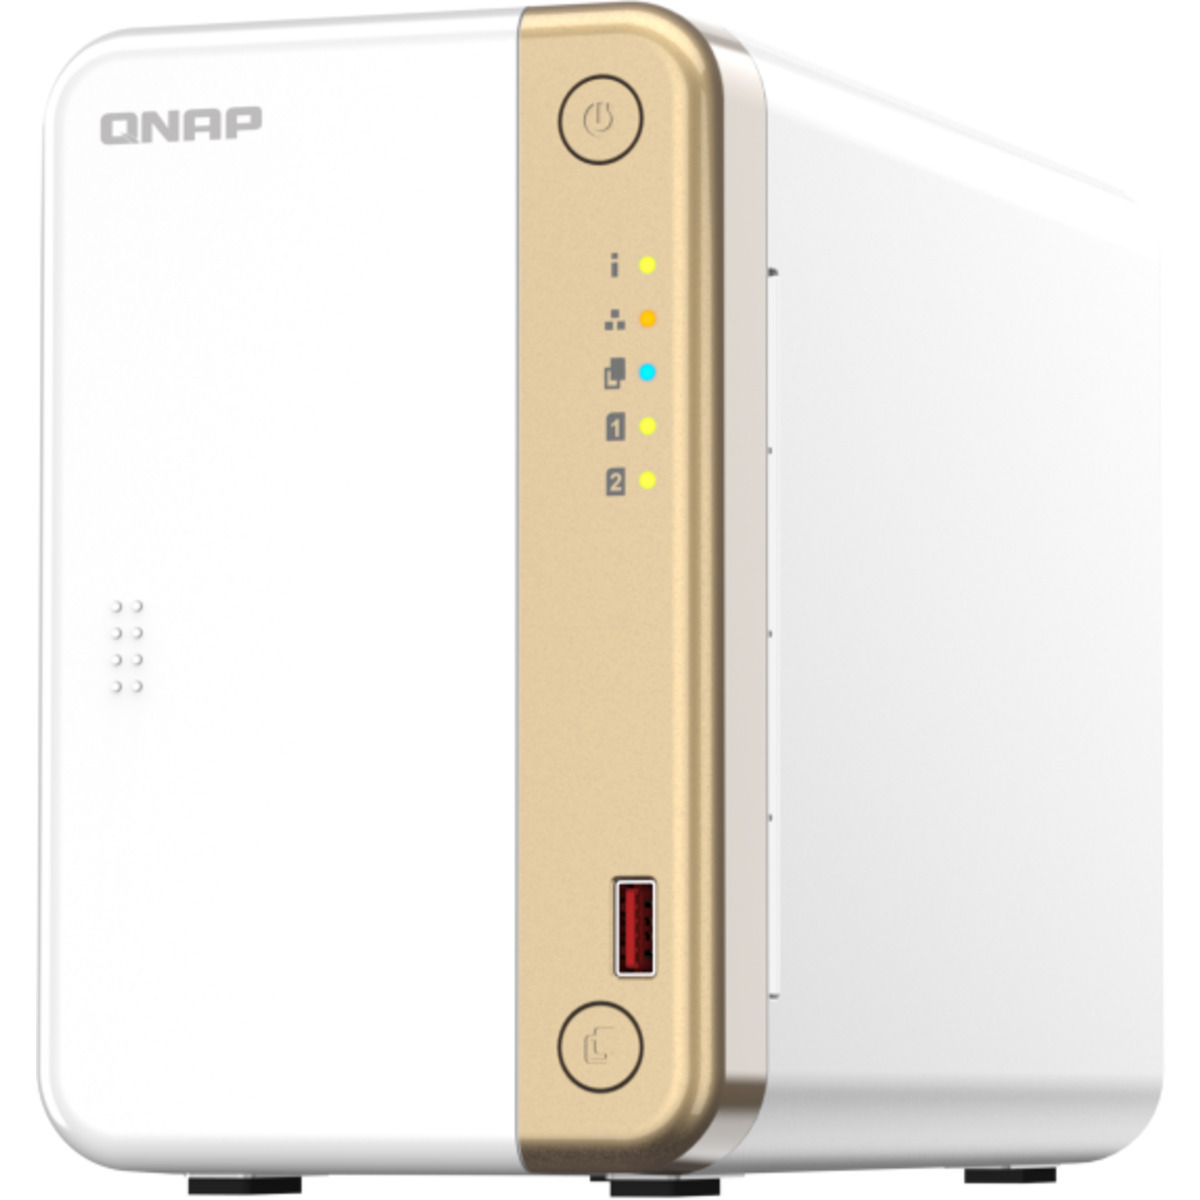 QNAP TS-262 6tb 2-Bay Desktop Personal / Basic Home / Small Office NAS - Network Attached Storage Device 1x6tb Seagate EXOS 7E10 ST6000NM019B 3.5 7200rpm SATA 6Gb/s HDD ENTERPRISE Class Drives Installed - Burn-In Tested TS-262